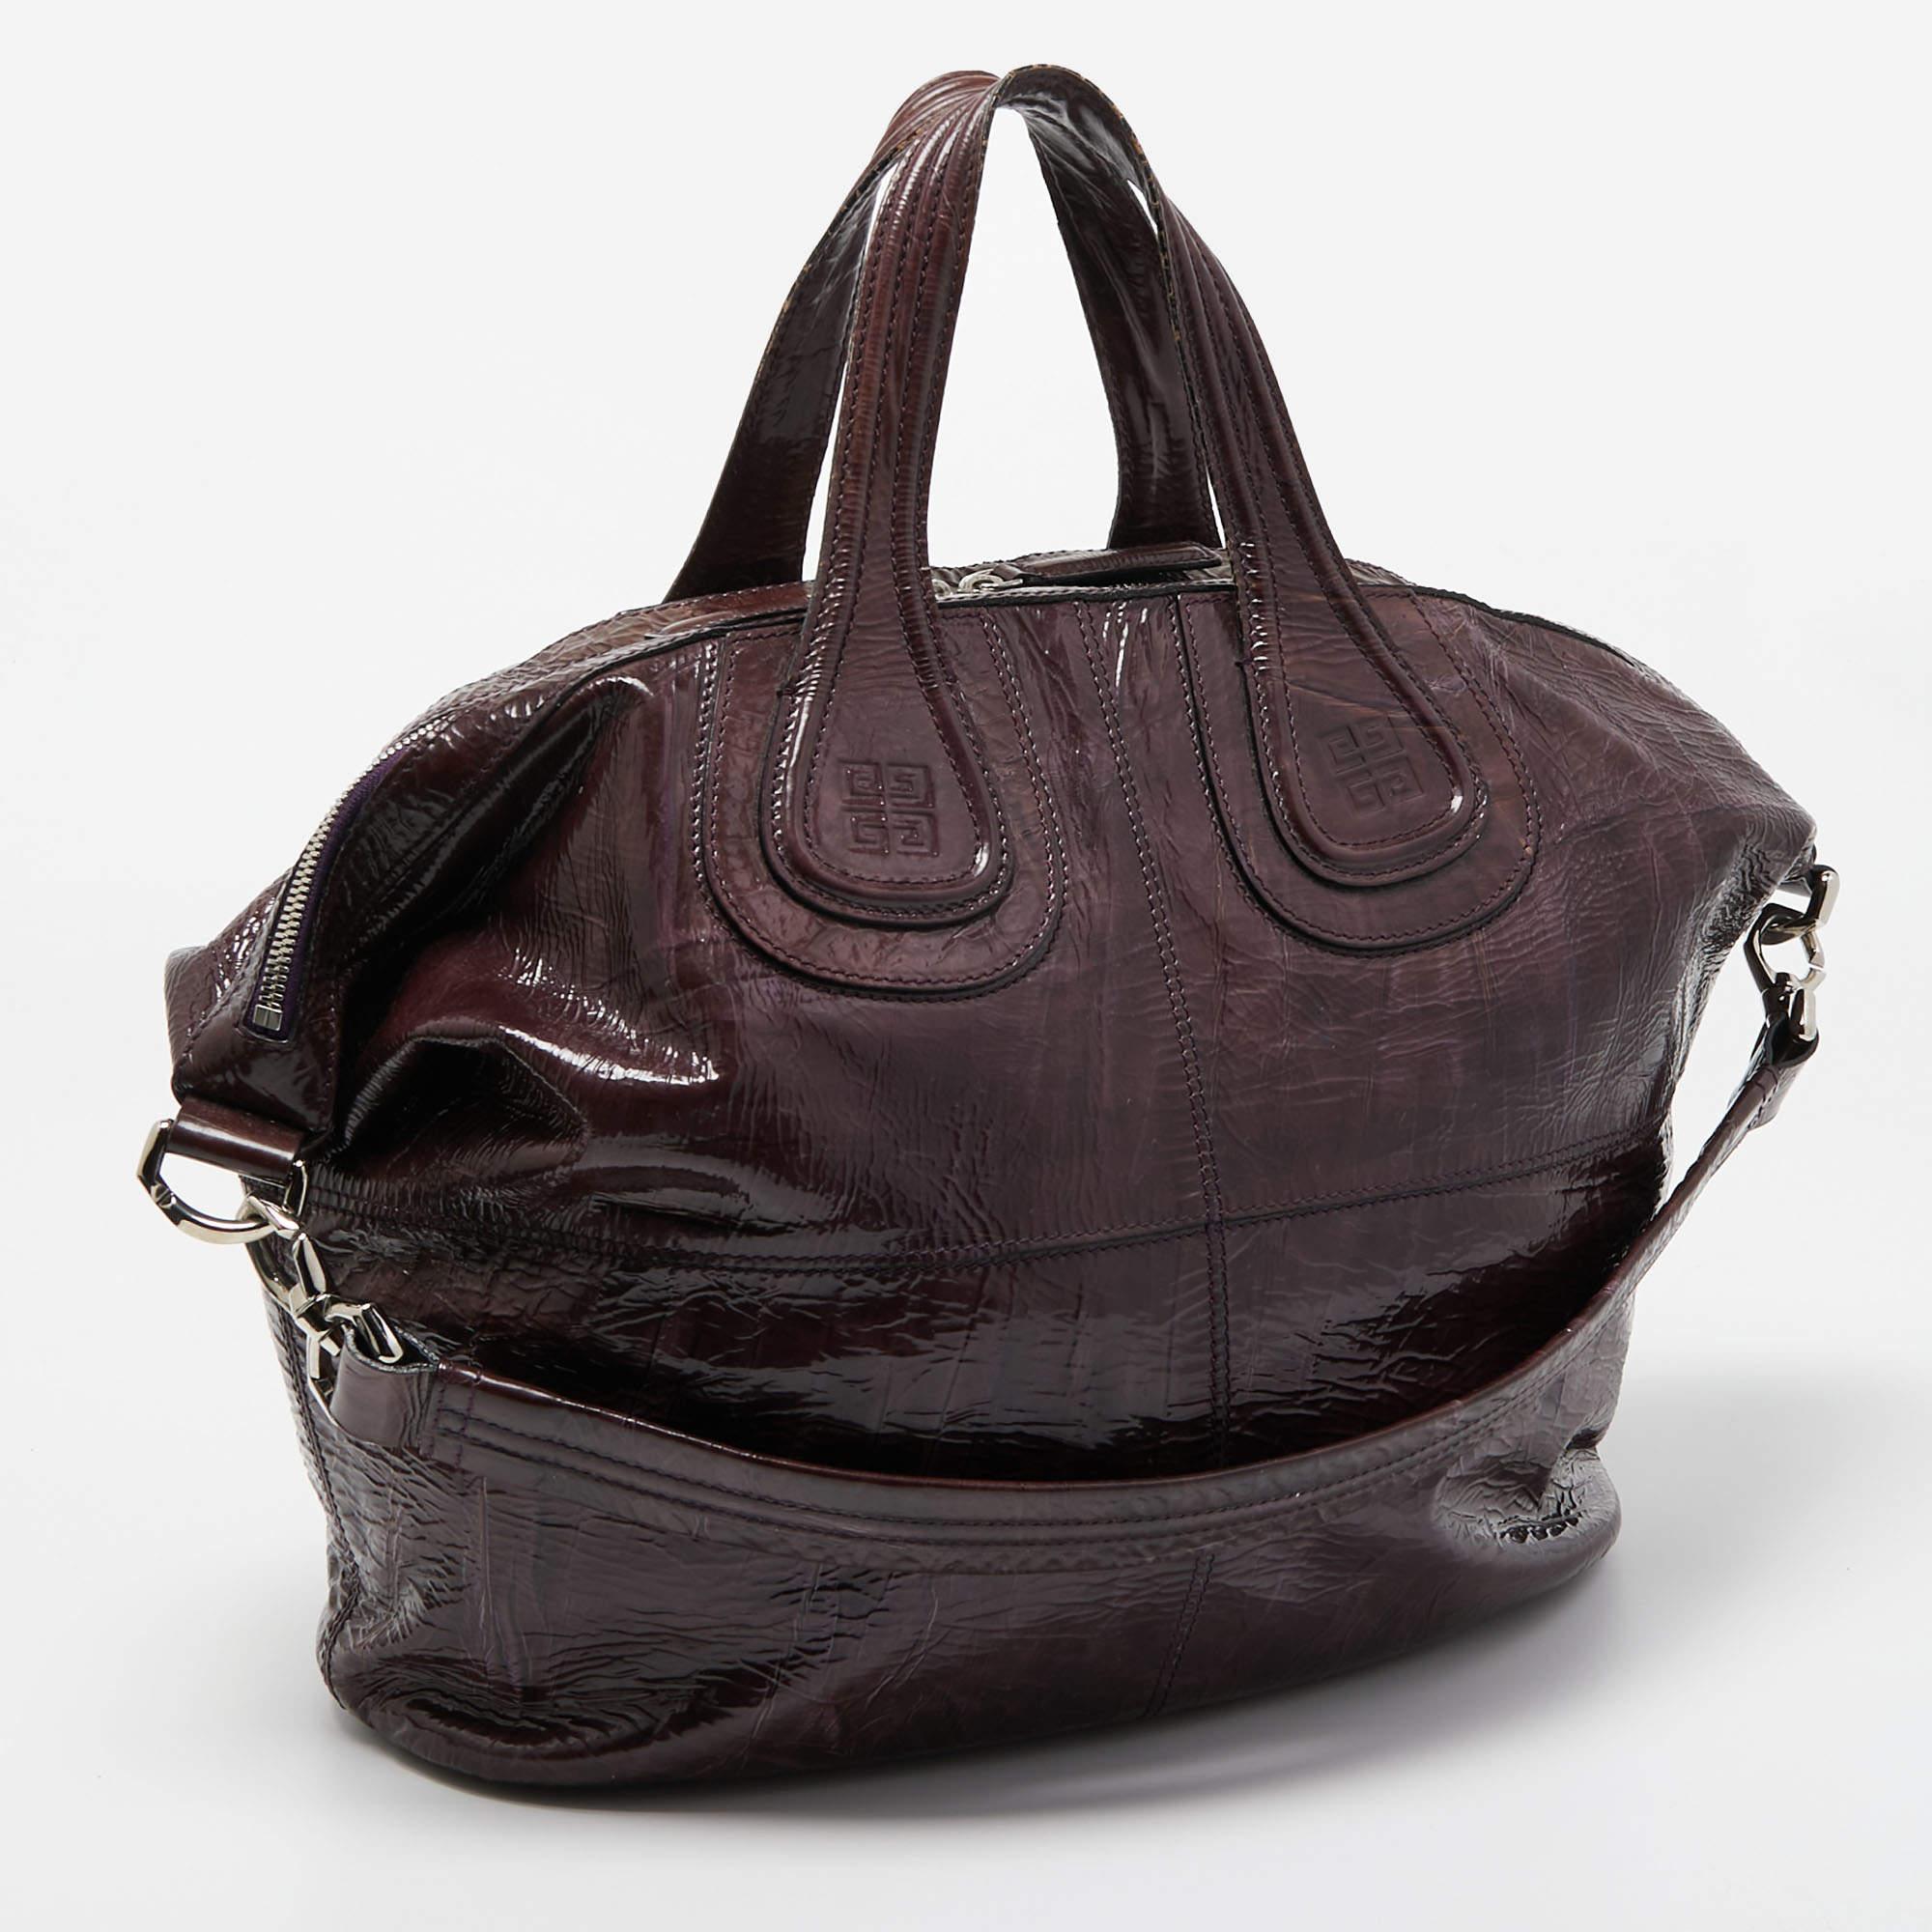 Excellently crafted from aged patent leather for a classy touch, this Nightingale bag from Givenchy is a creation that is ideal for daily use and on your travels. It features two top handles, a shoulder strap, and a spacious interior to dutifully